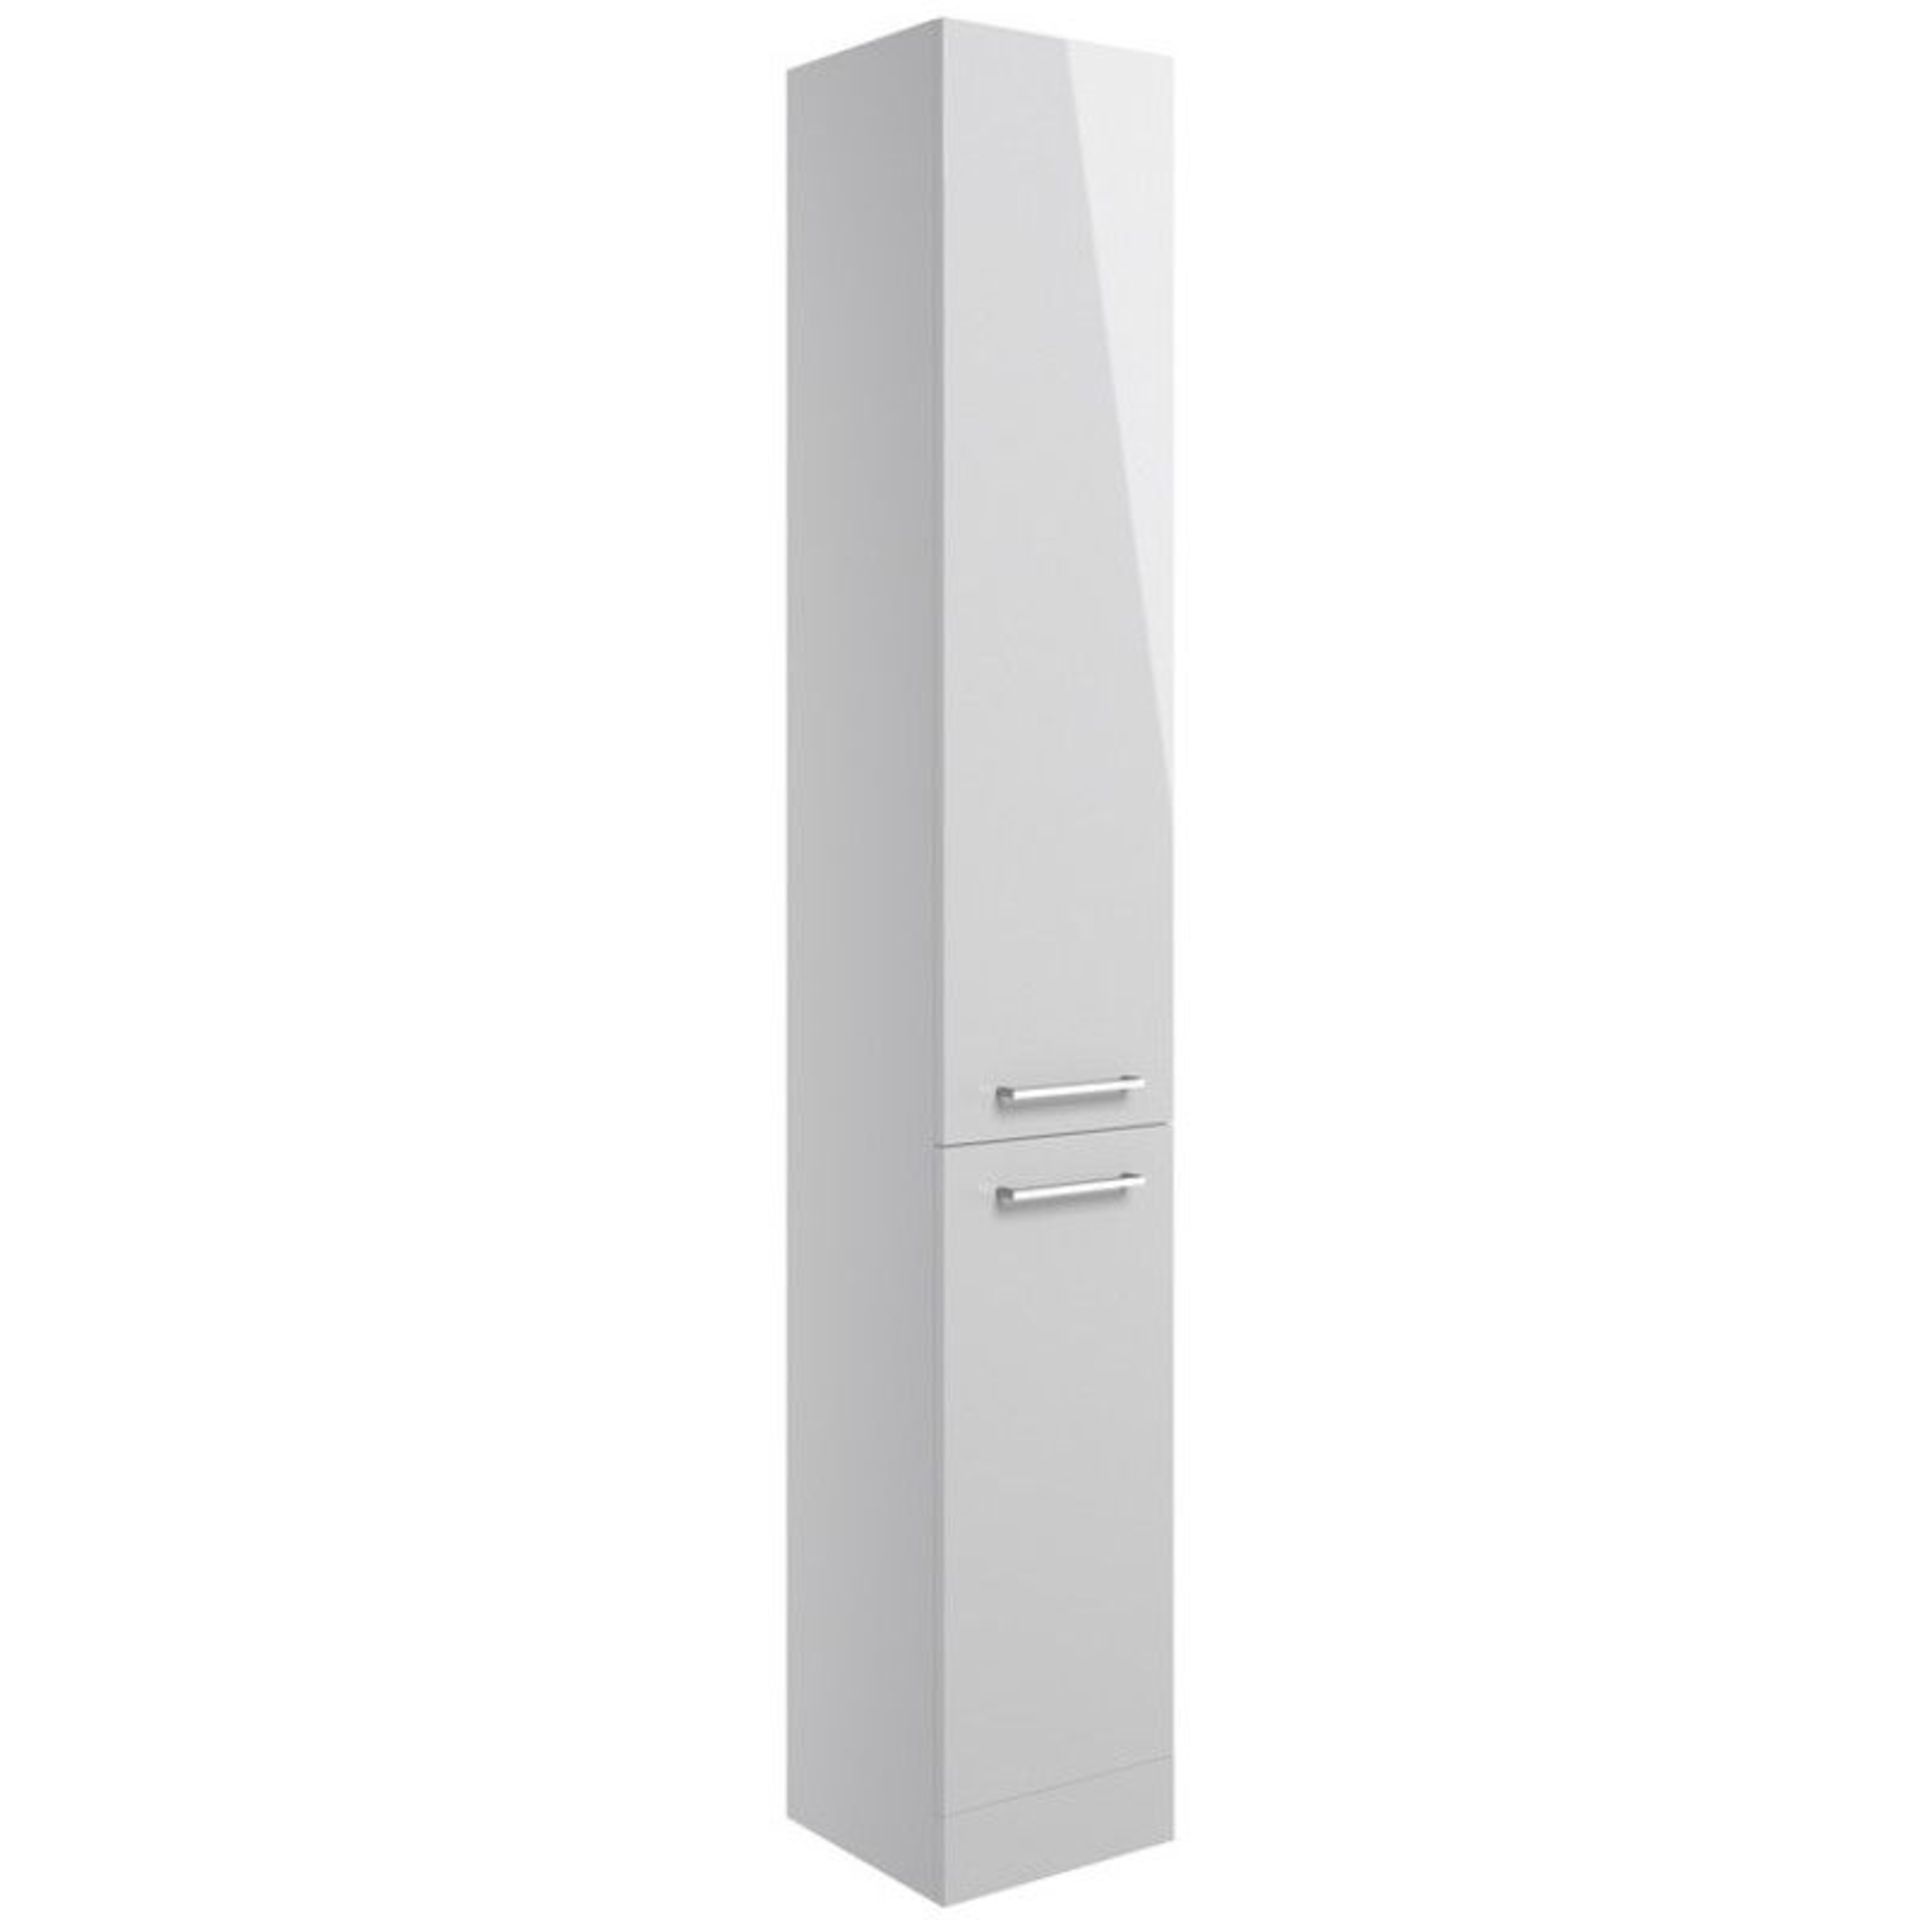 New Boxed 600mm Trent Gloss White Sink Cabinet - Floor Standing. RRP £499.99.Comes Complete Wit... - Image 2 of 3